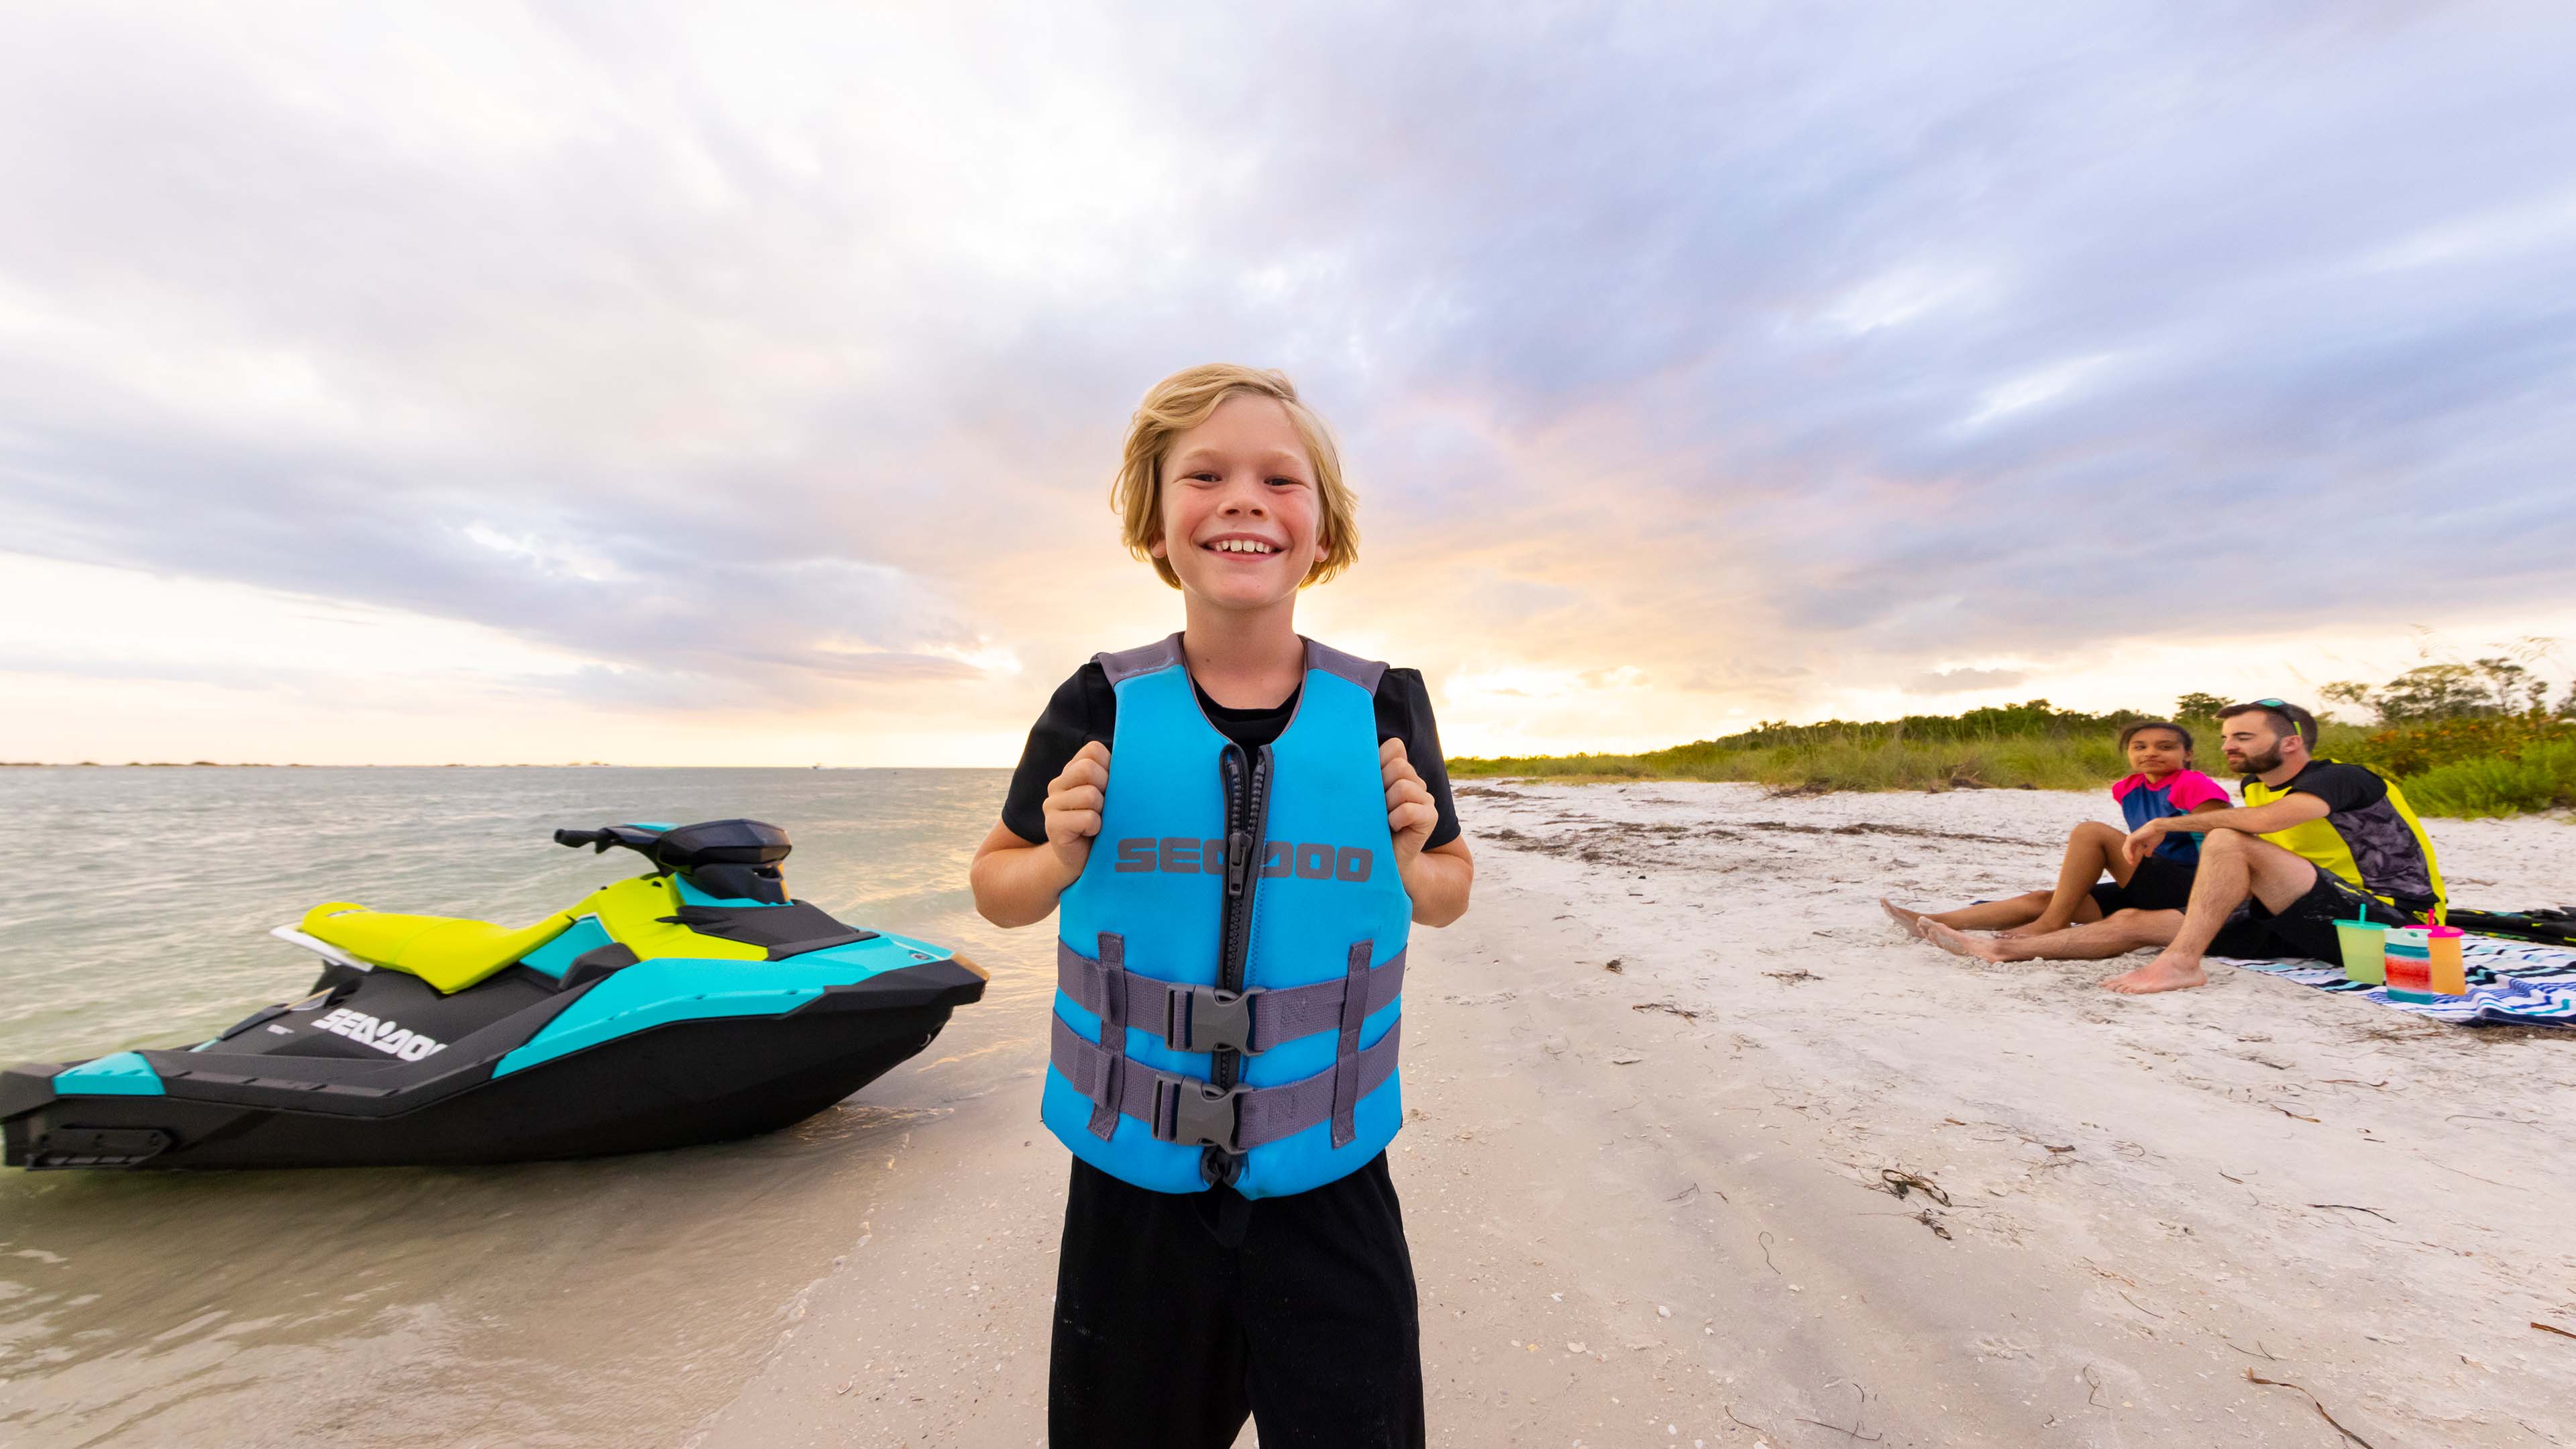 Kid with a Sea-Doo lifevest smiling